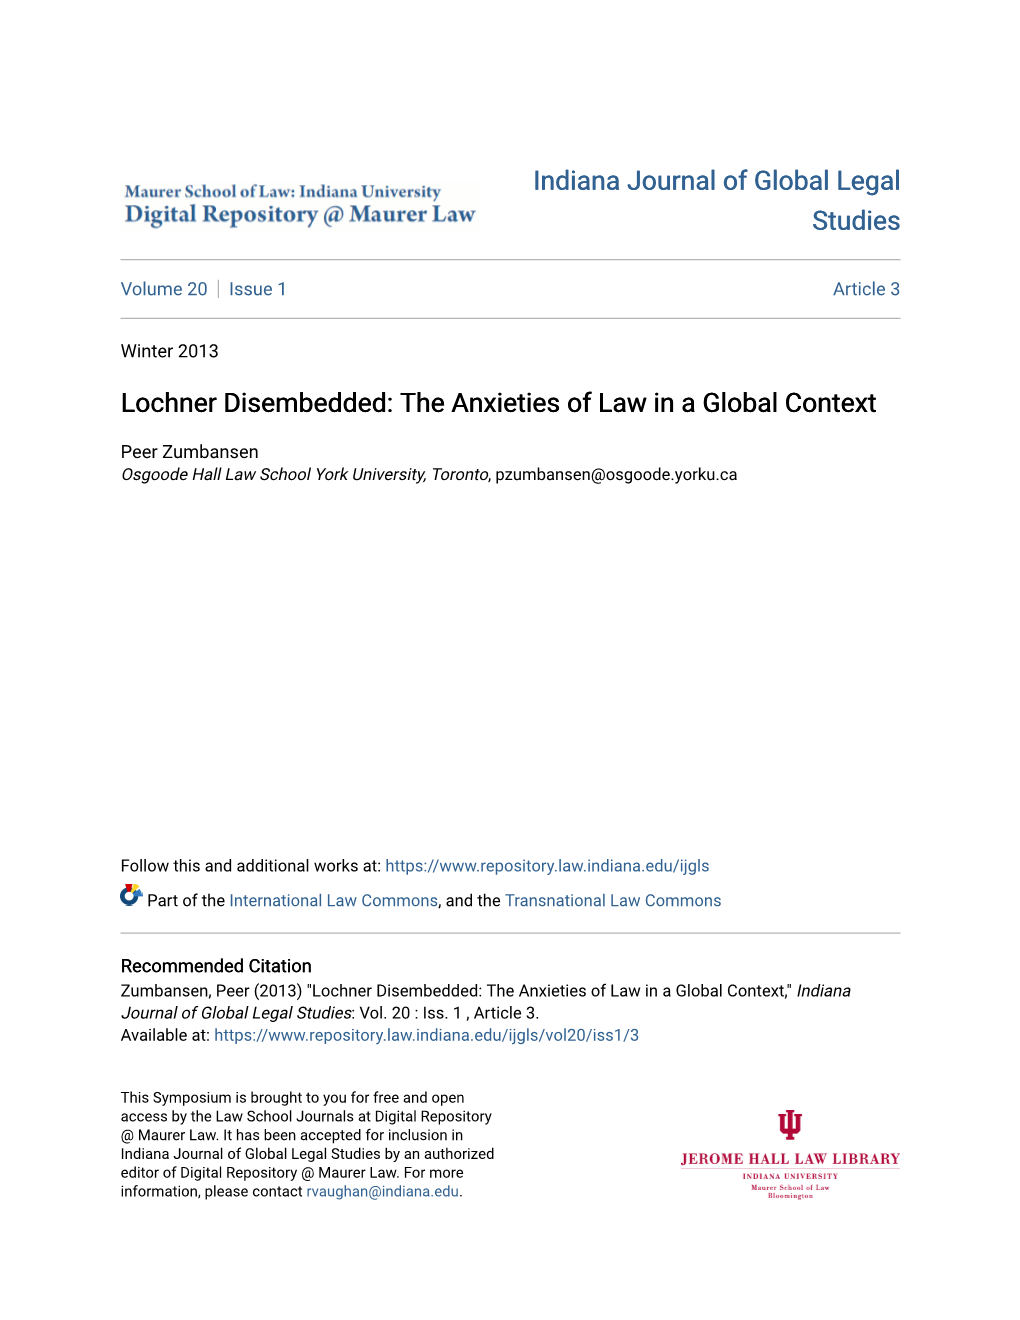 Lochner Disembedded: the Anxieties of Law in a Global Context